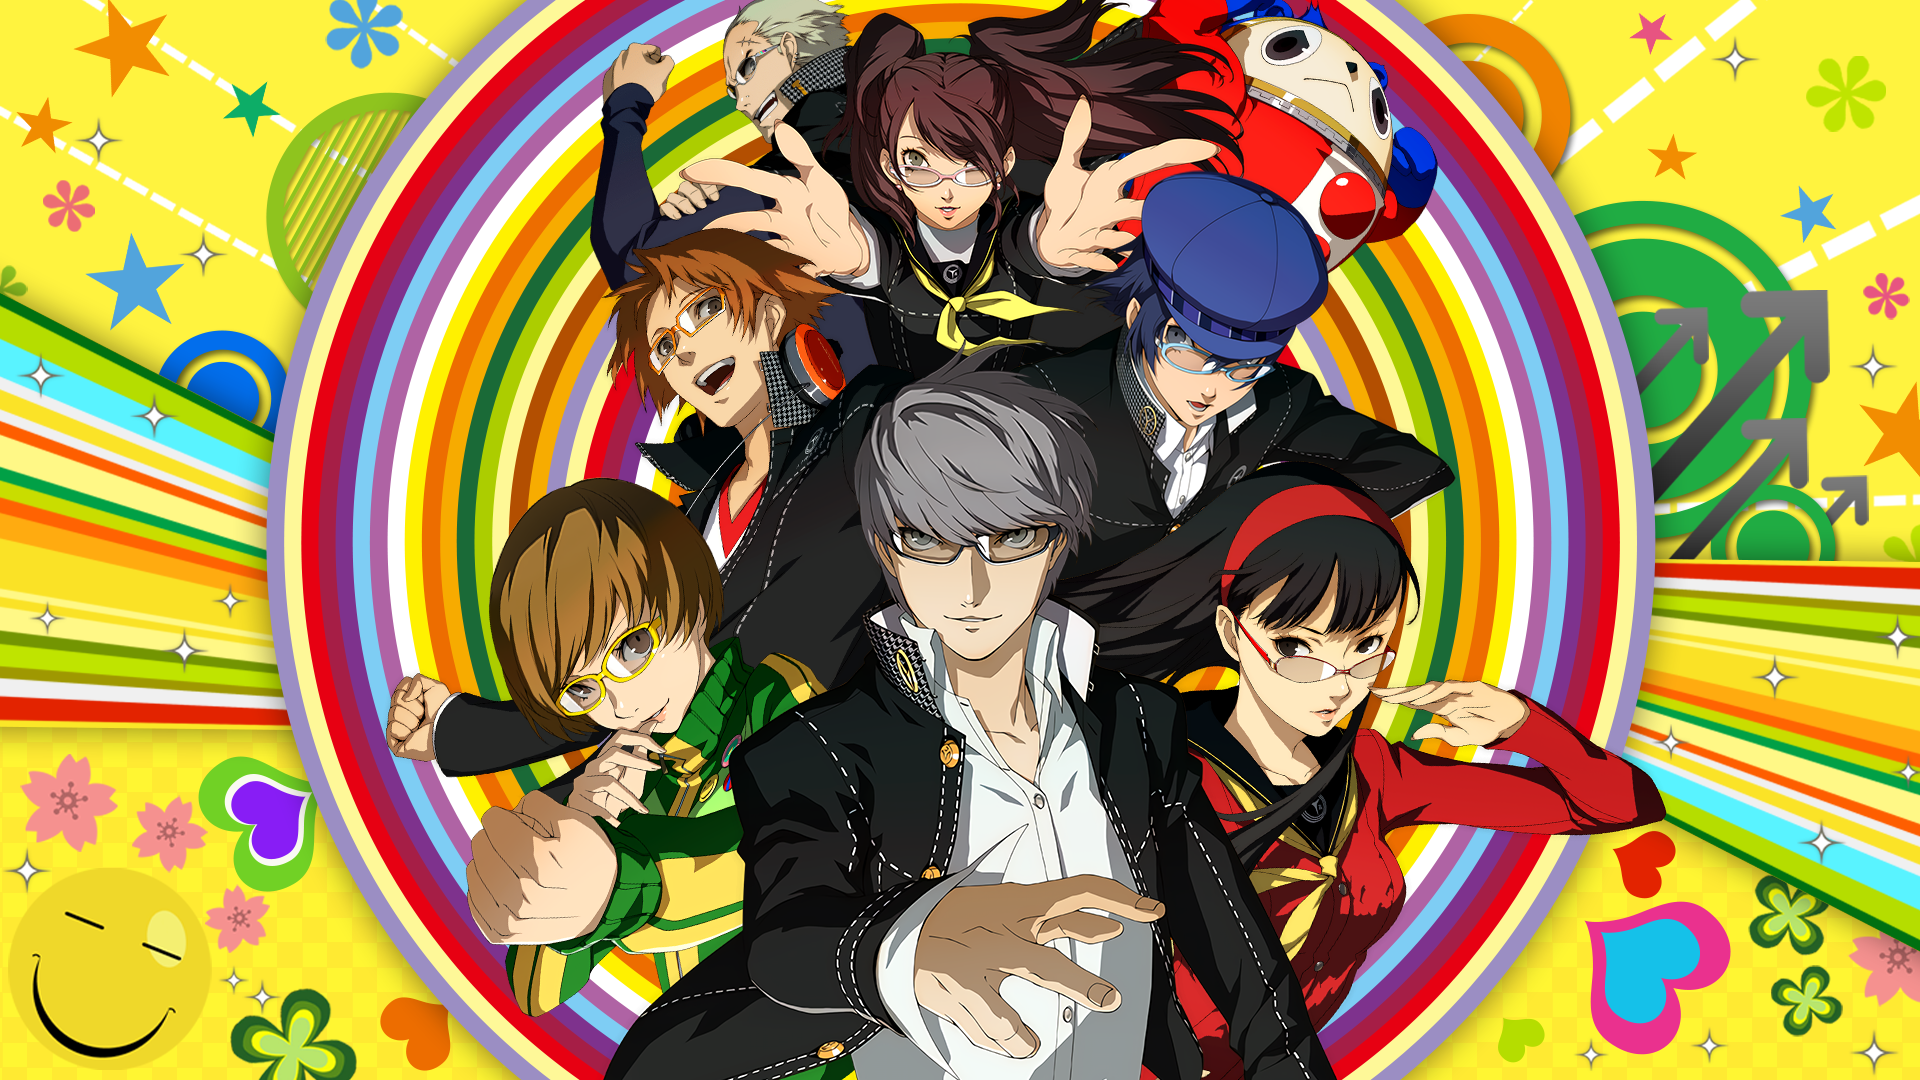 Made a P4G desktop wallpaper heavily based on the official art and thought I'd share it with you guys: persona4golden